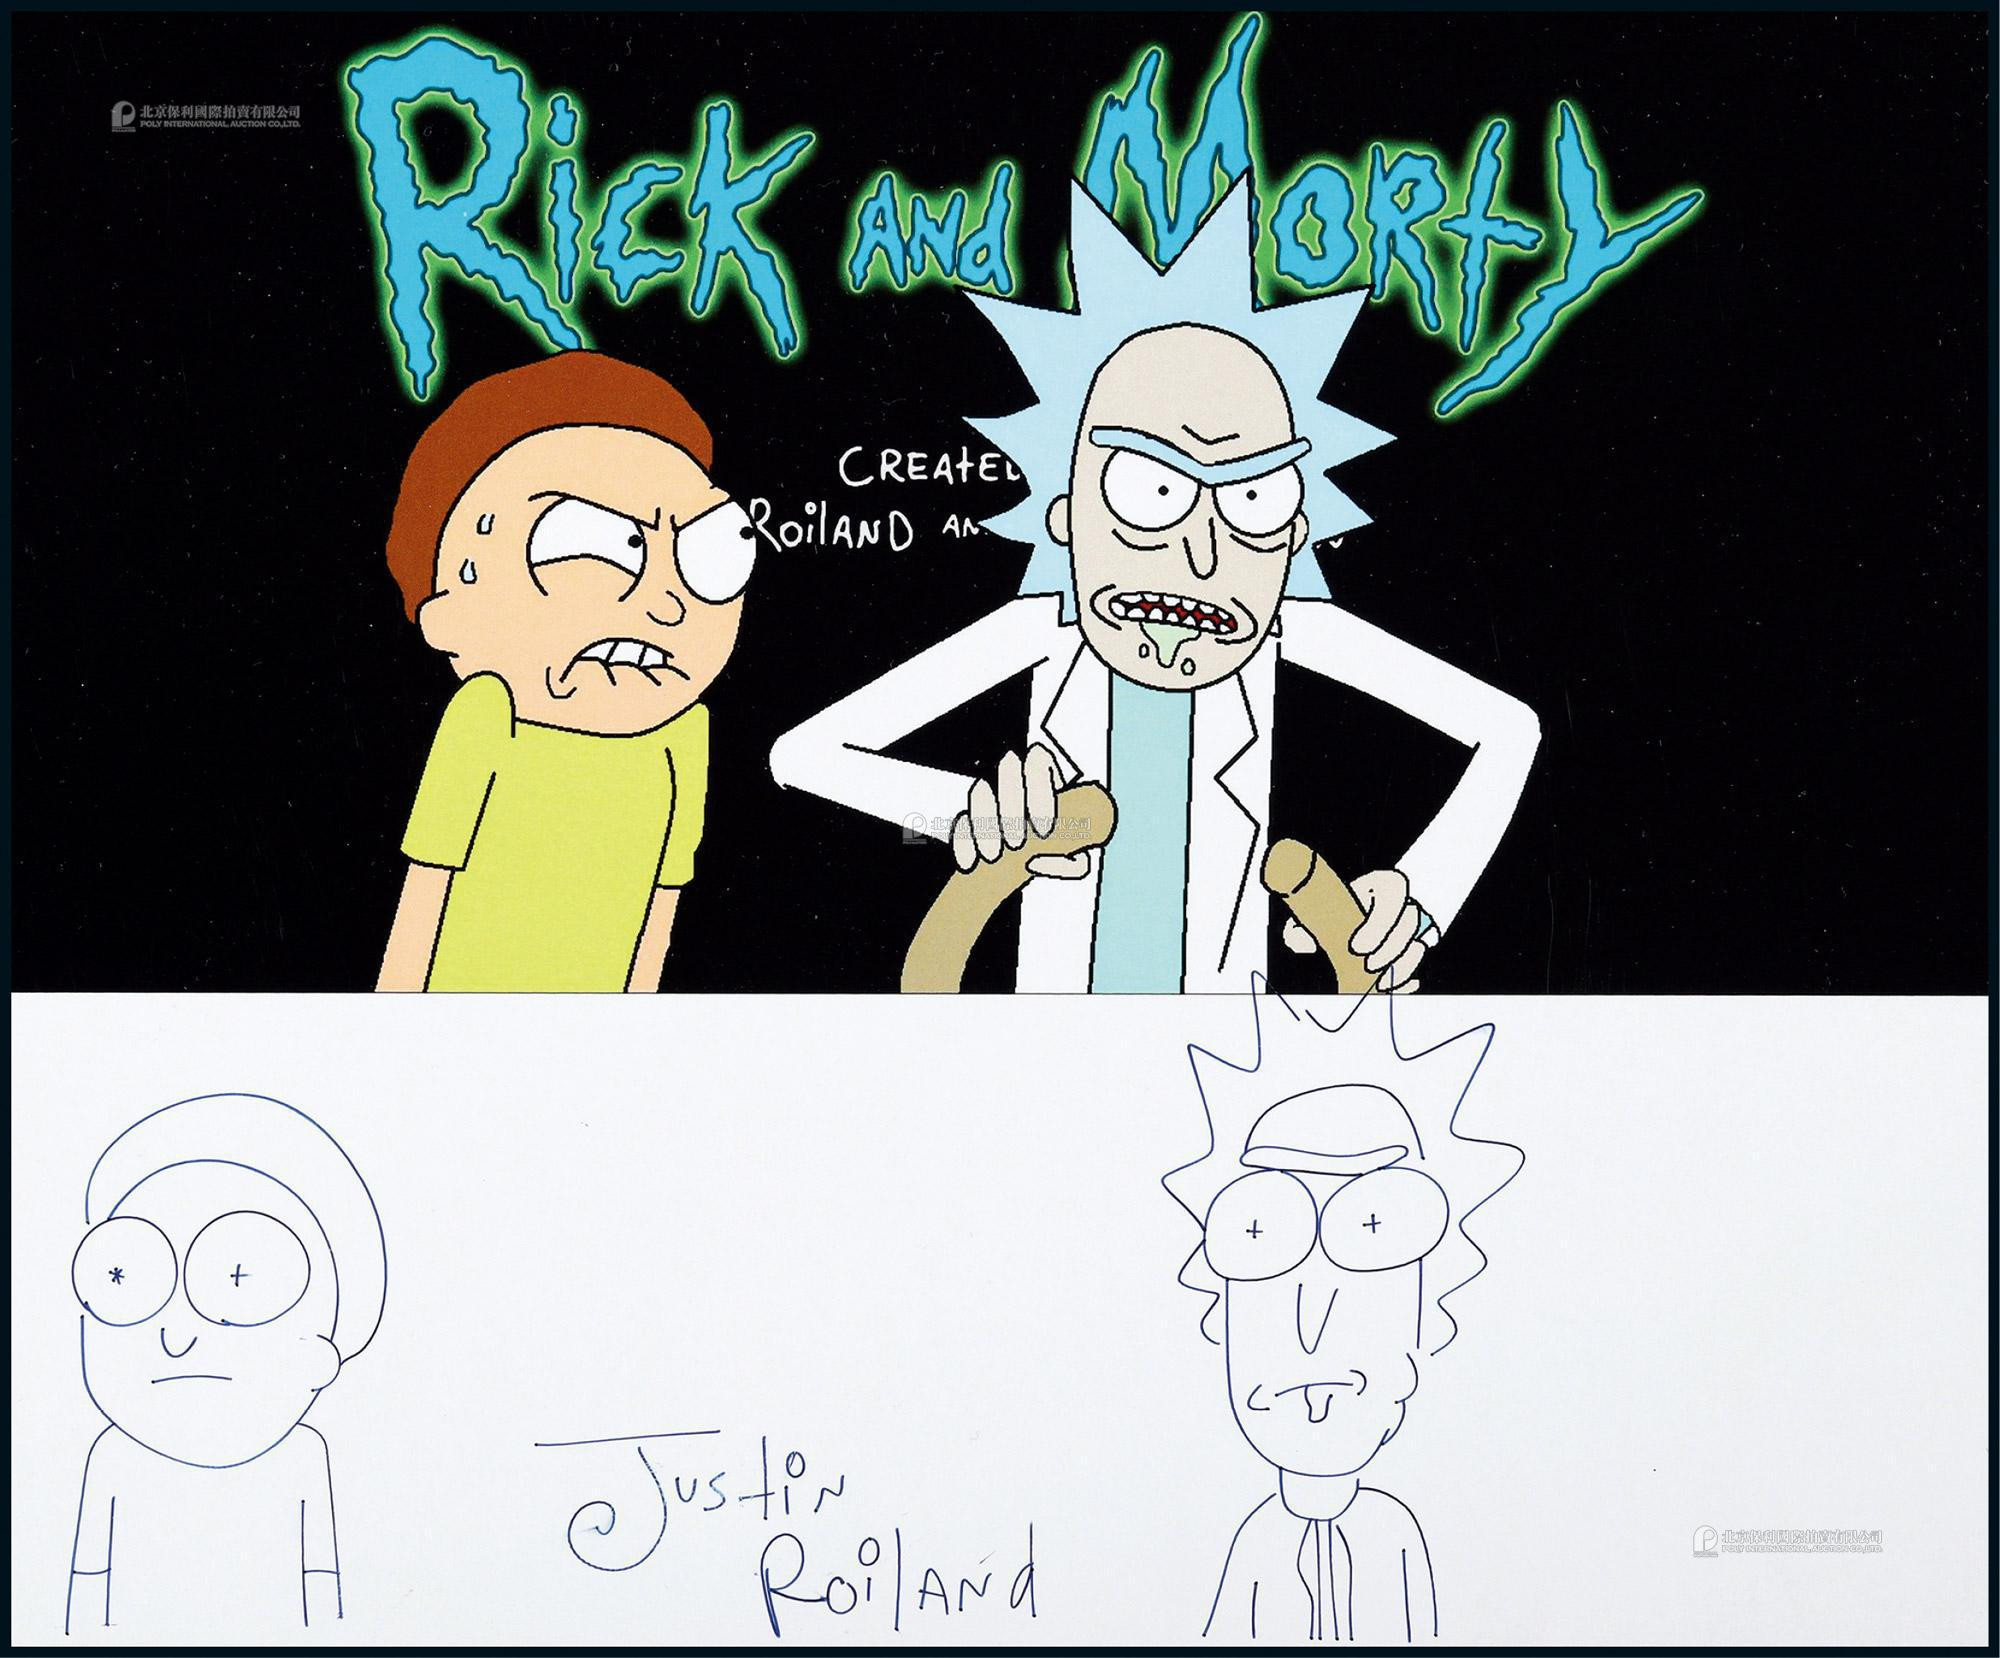 The classic painting of “Rick and Morty” hand-drawn by “famous American animator” Justin Roiland, with certificate